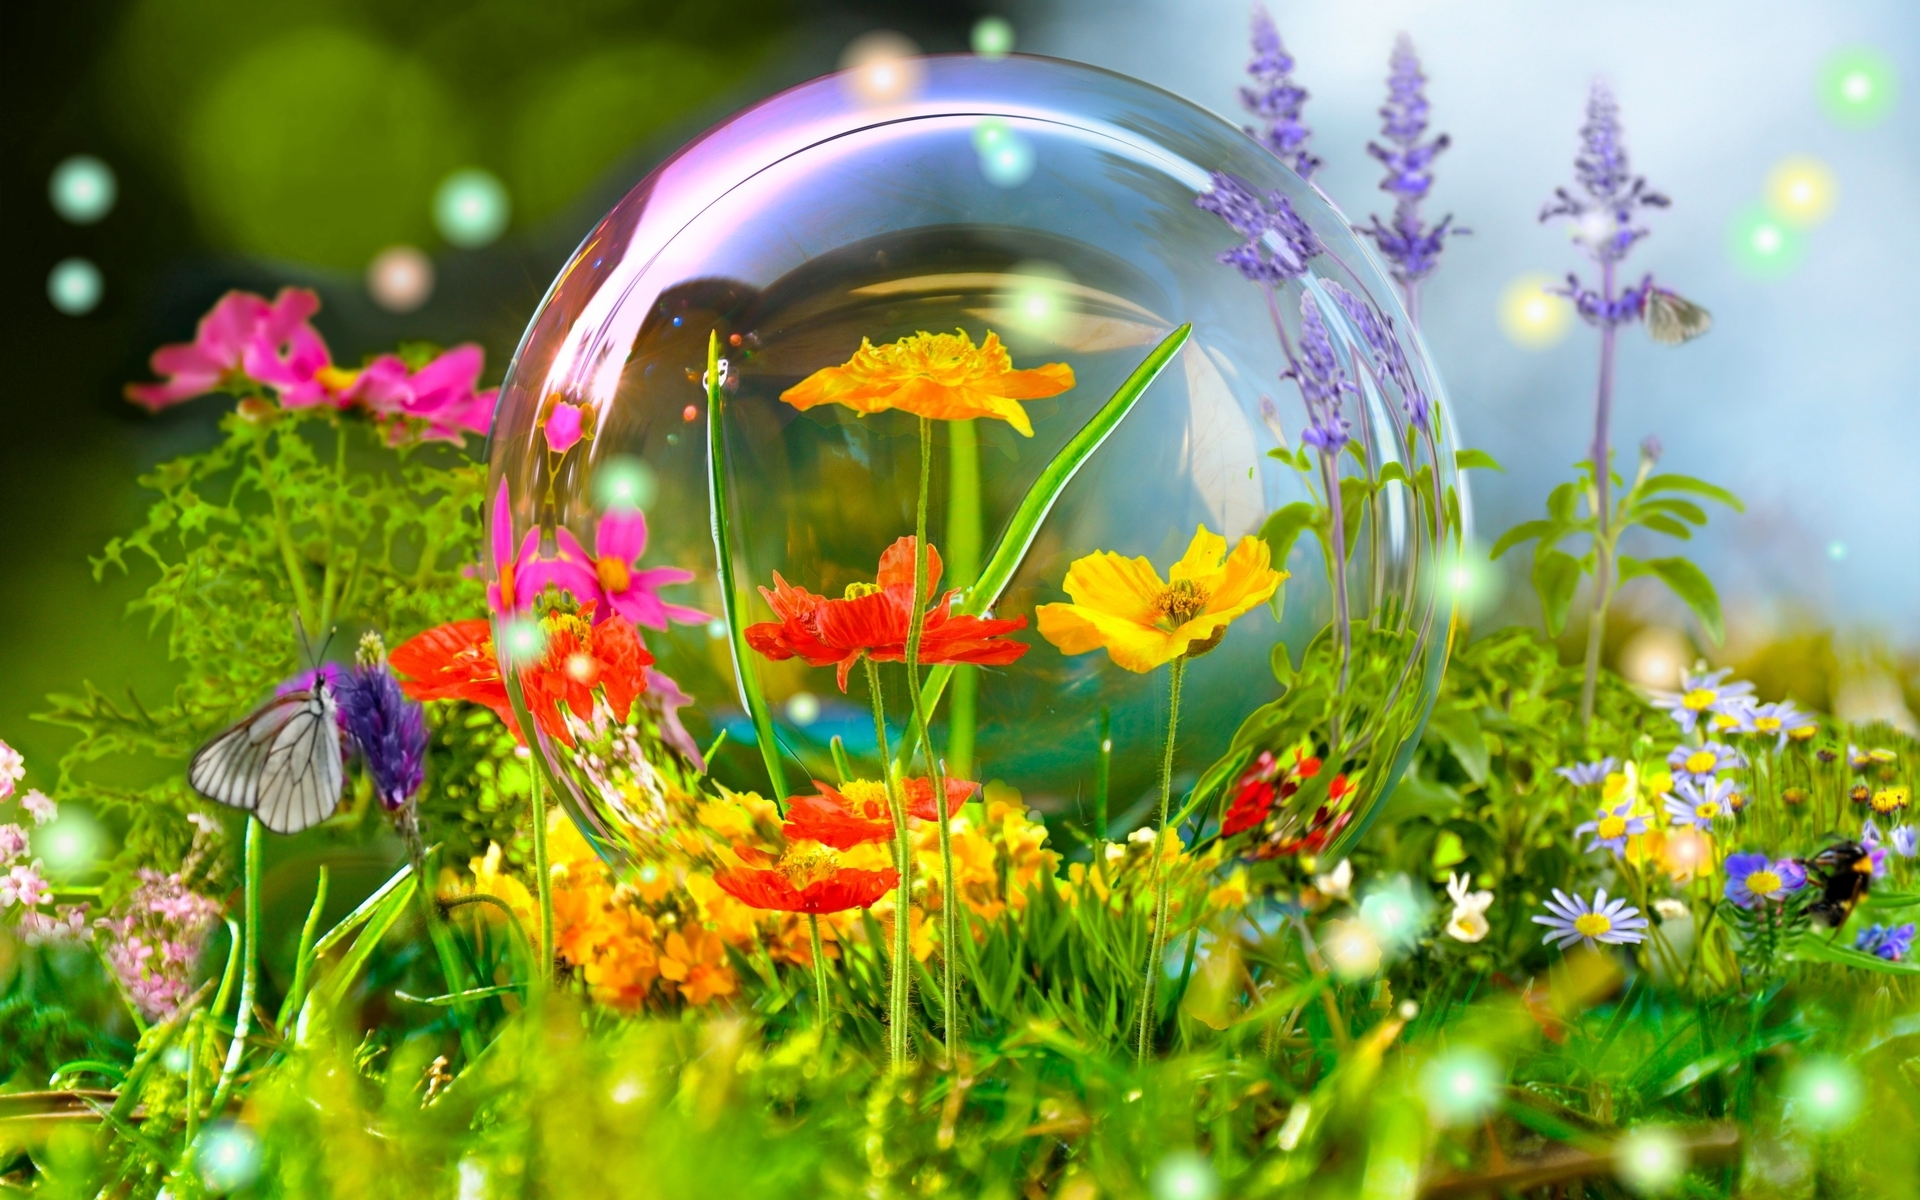 Image: Wild flowers, grass, insects, butterfly, bumblebee, bubble